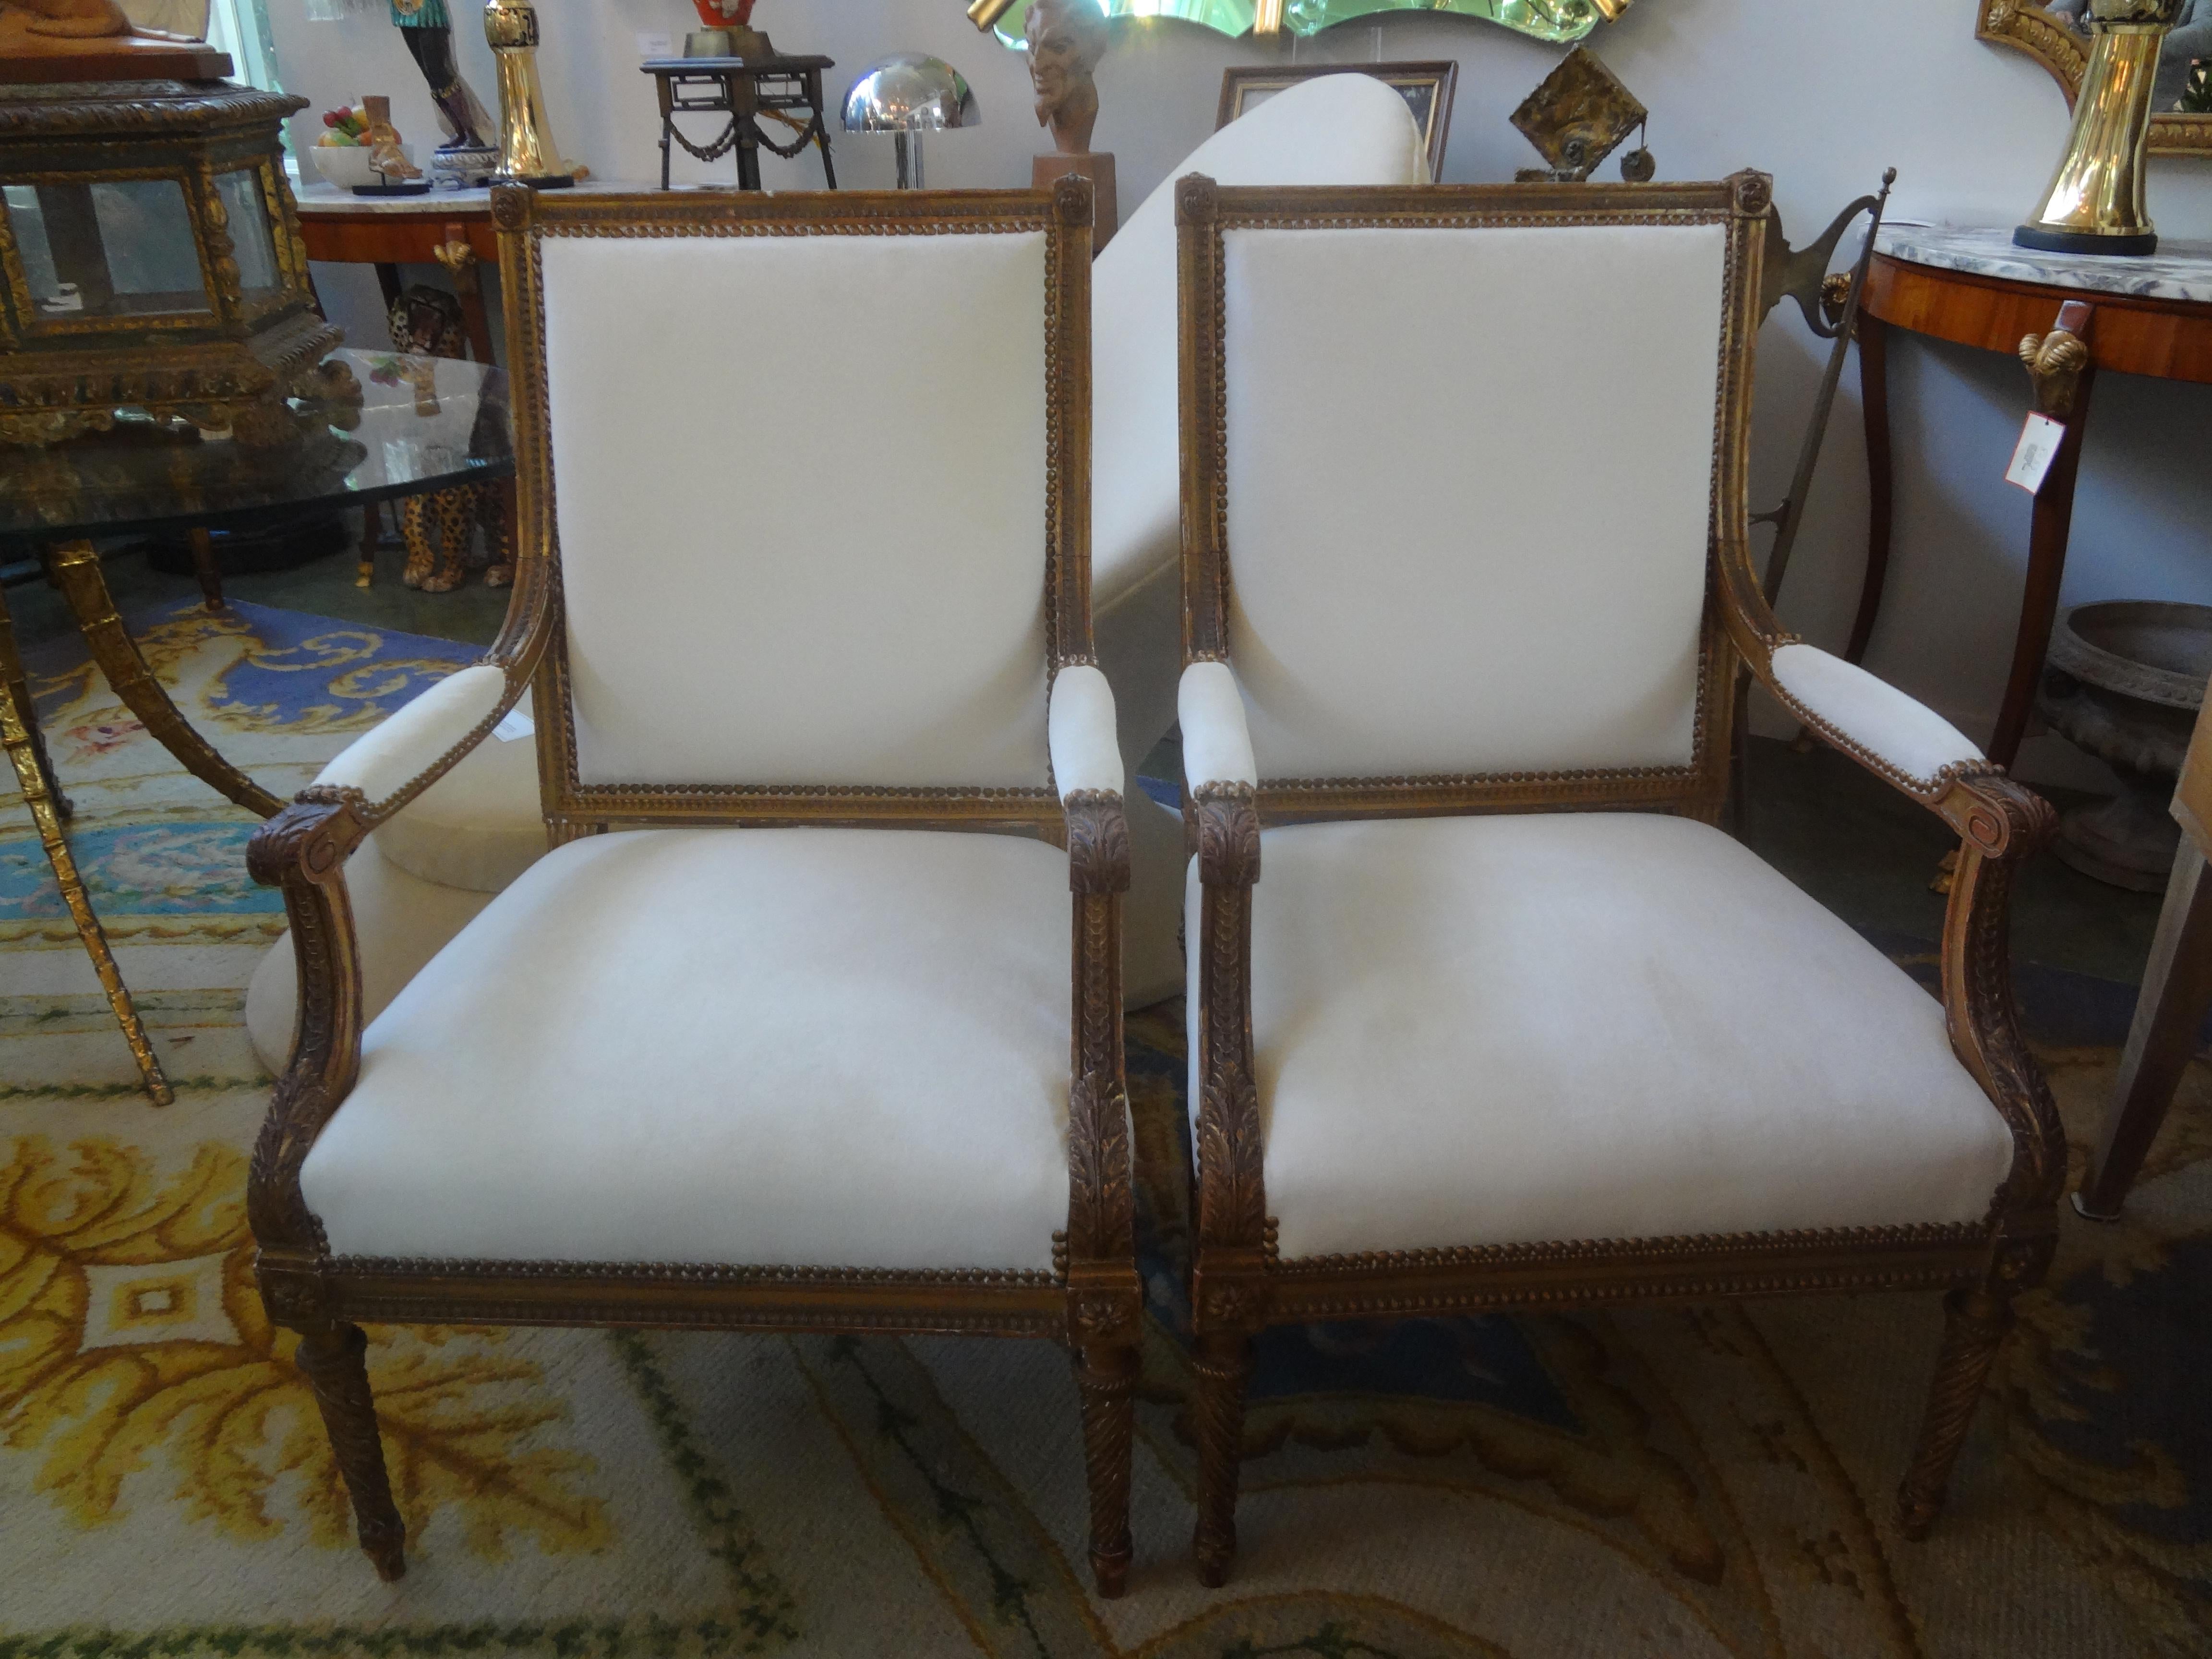 Pair of 19th century French Louis XVI style giltwood chairs.
This pair of generous size superior quality French Louis XVI style gilt wood chairs, armchairs, side chairs or fauteuils have been professionally upholstered in luxe low pile mohair type